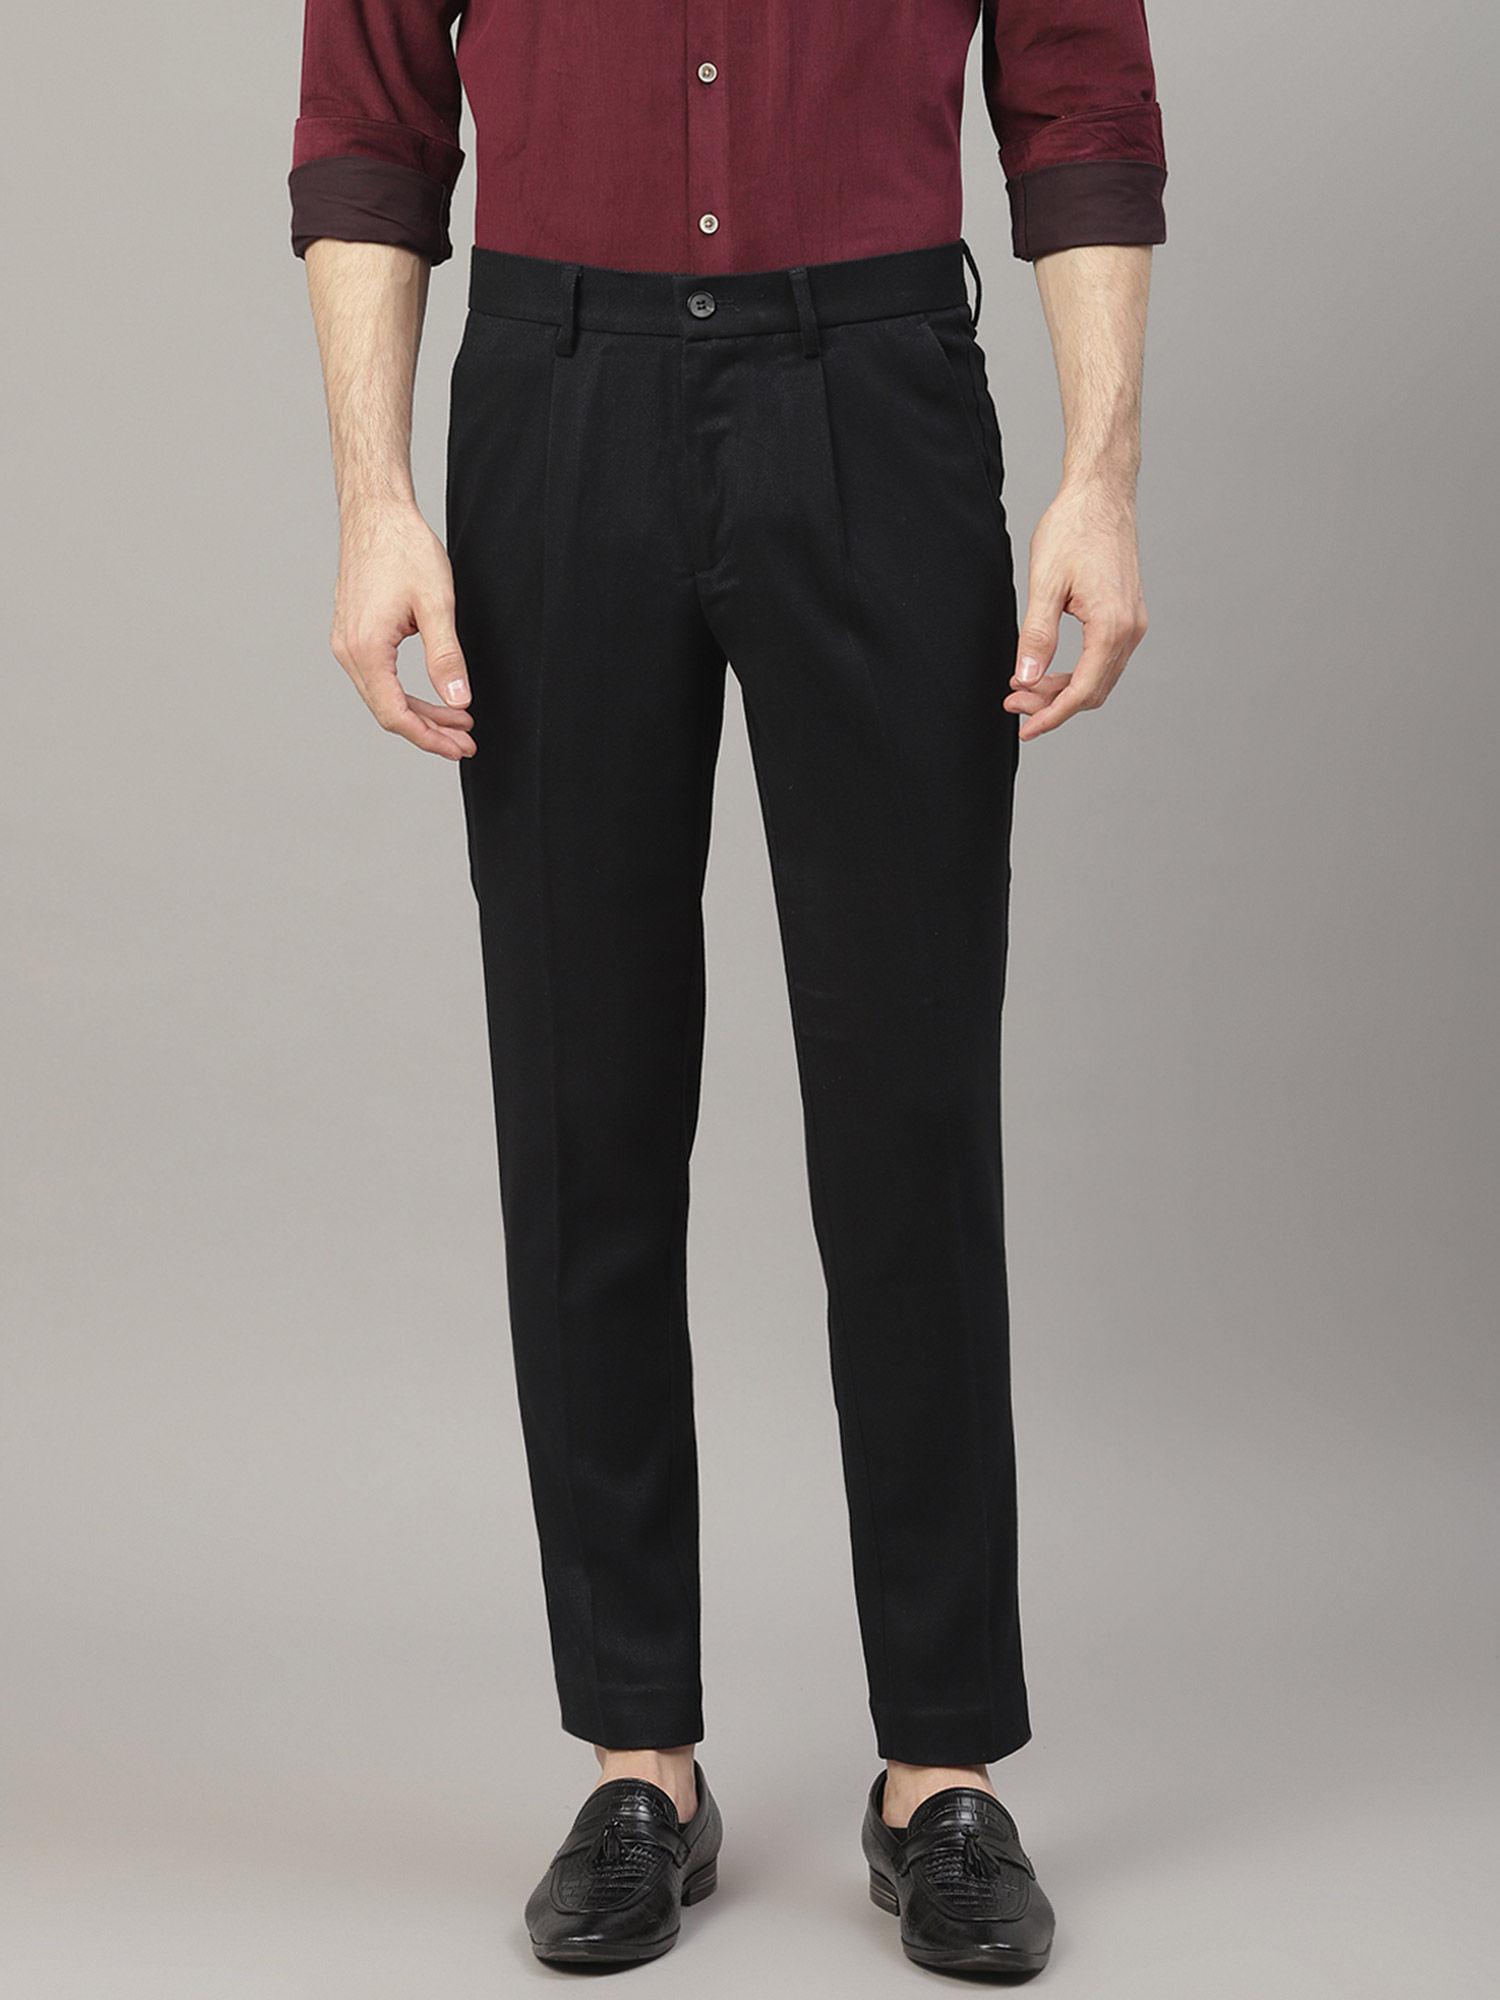 Navy Blue Self Design Trousers